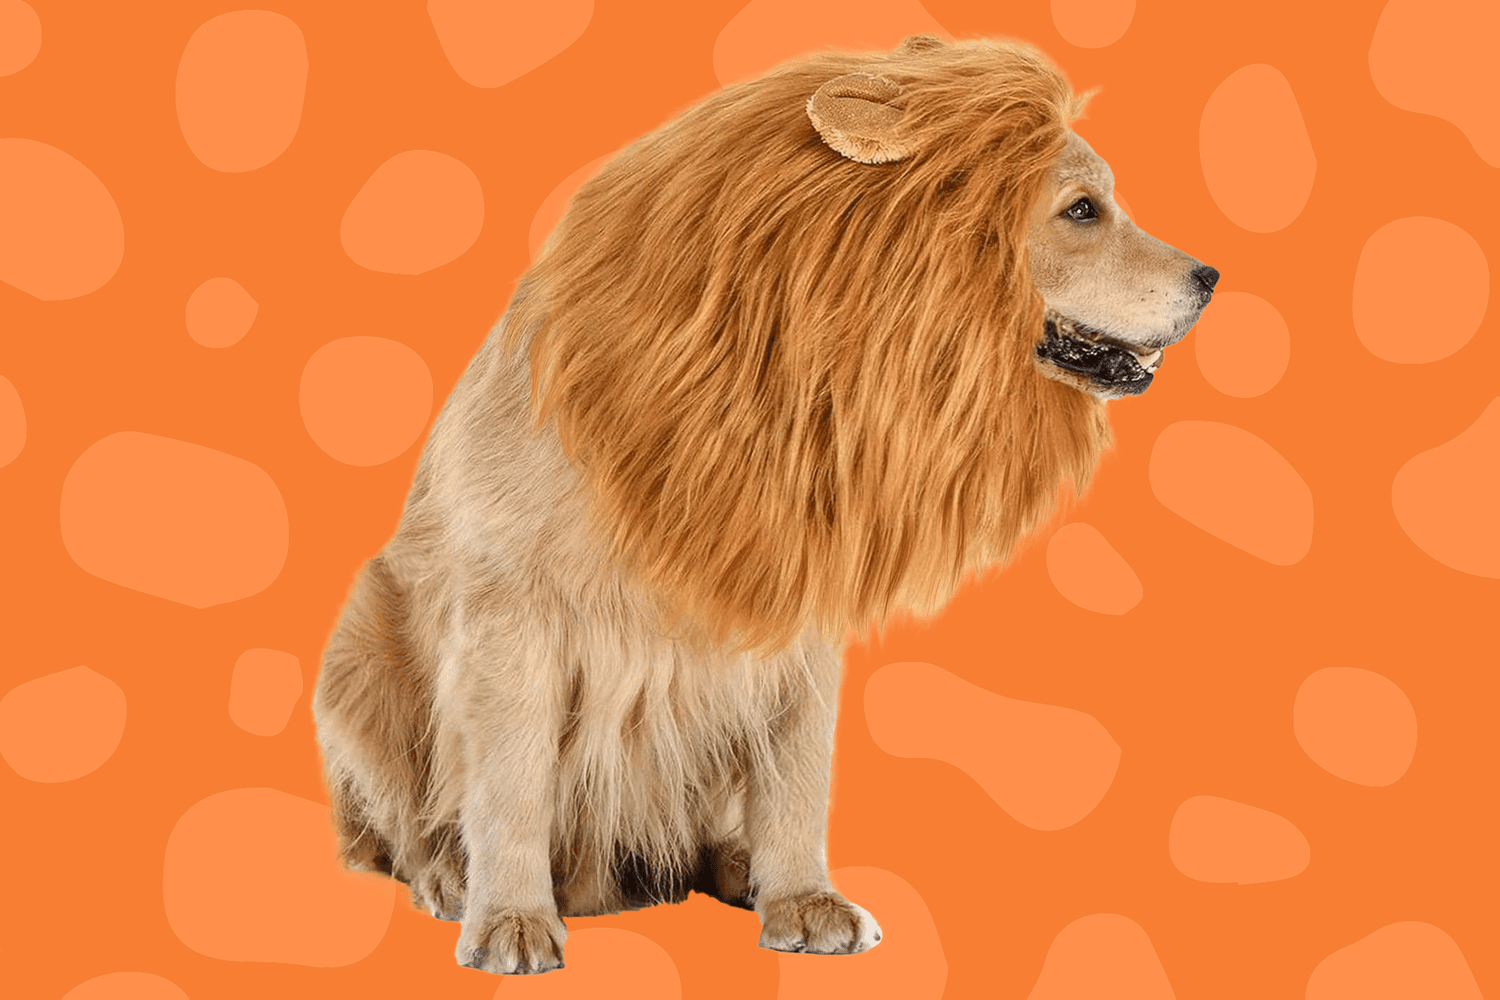 Lion Mane Wig For Cats And Dogs Funny Pet Cat Costumes For Halloween  Christmas Furry Pet Clothing Accessories|Cat Clothing| AliExpress | Lion's  Mane Wig For Funny Pet Cat Costumes For Furry |